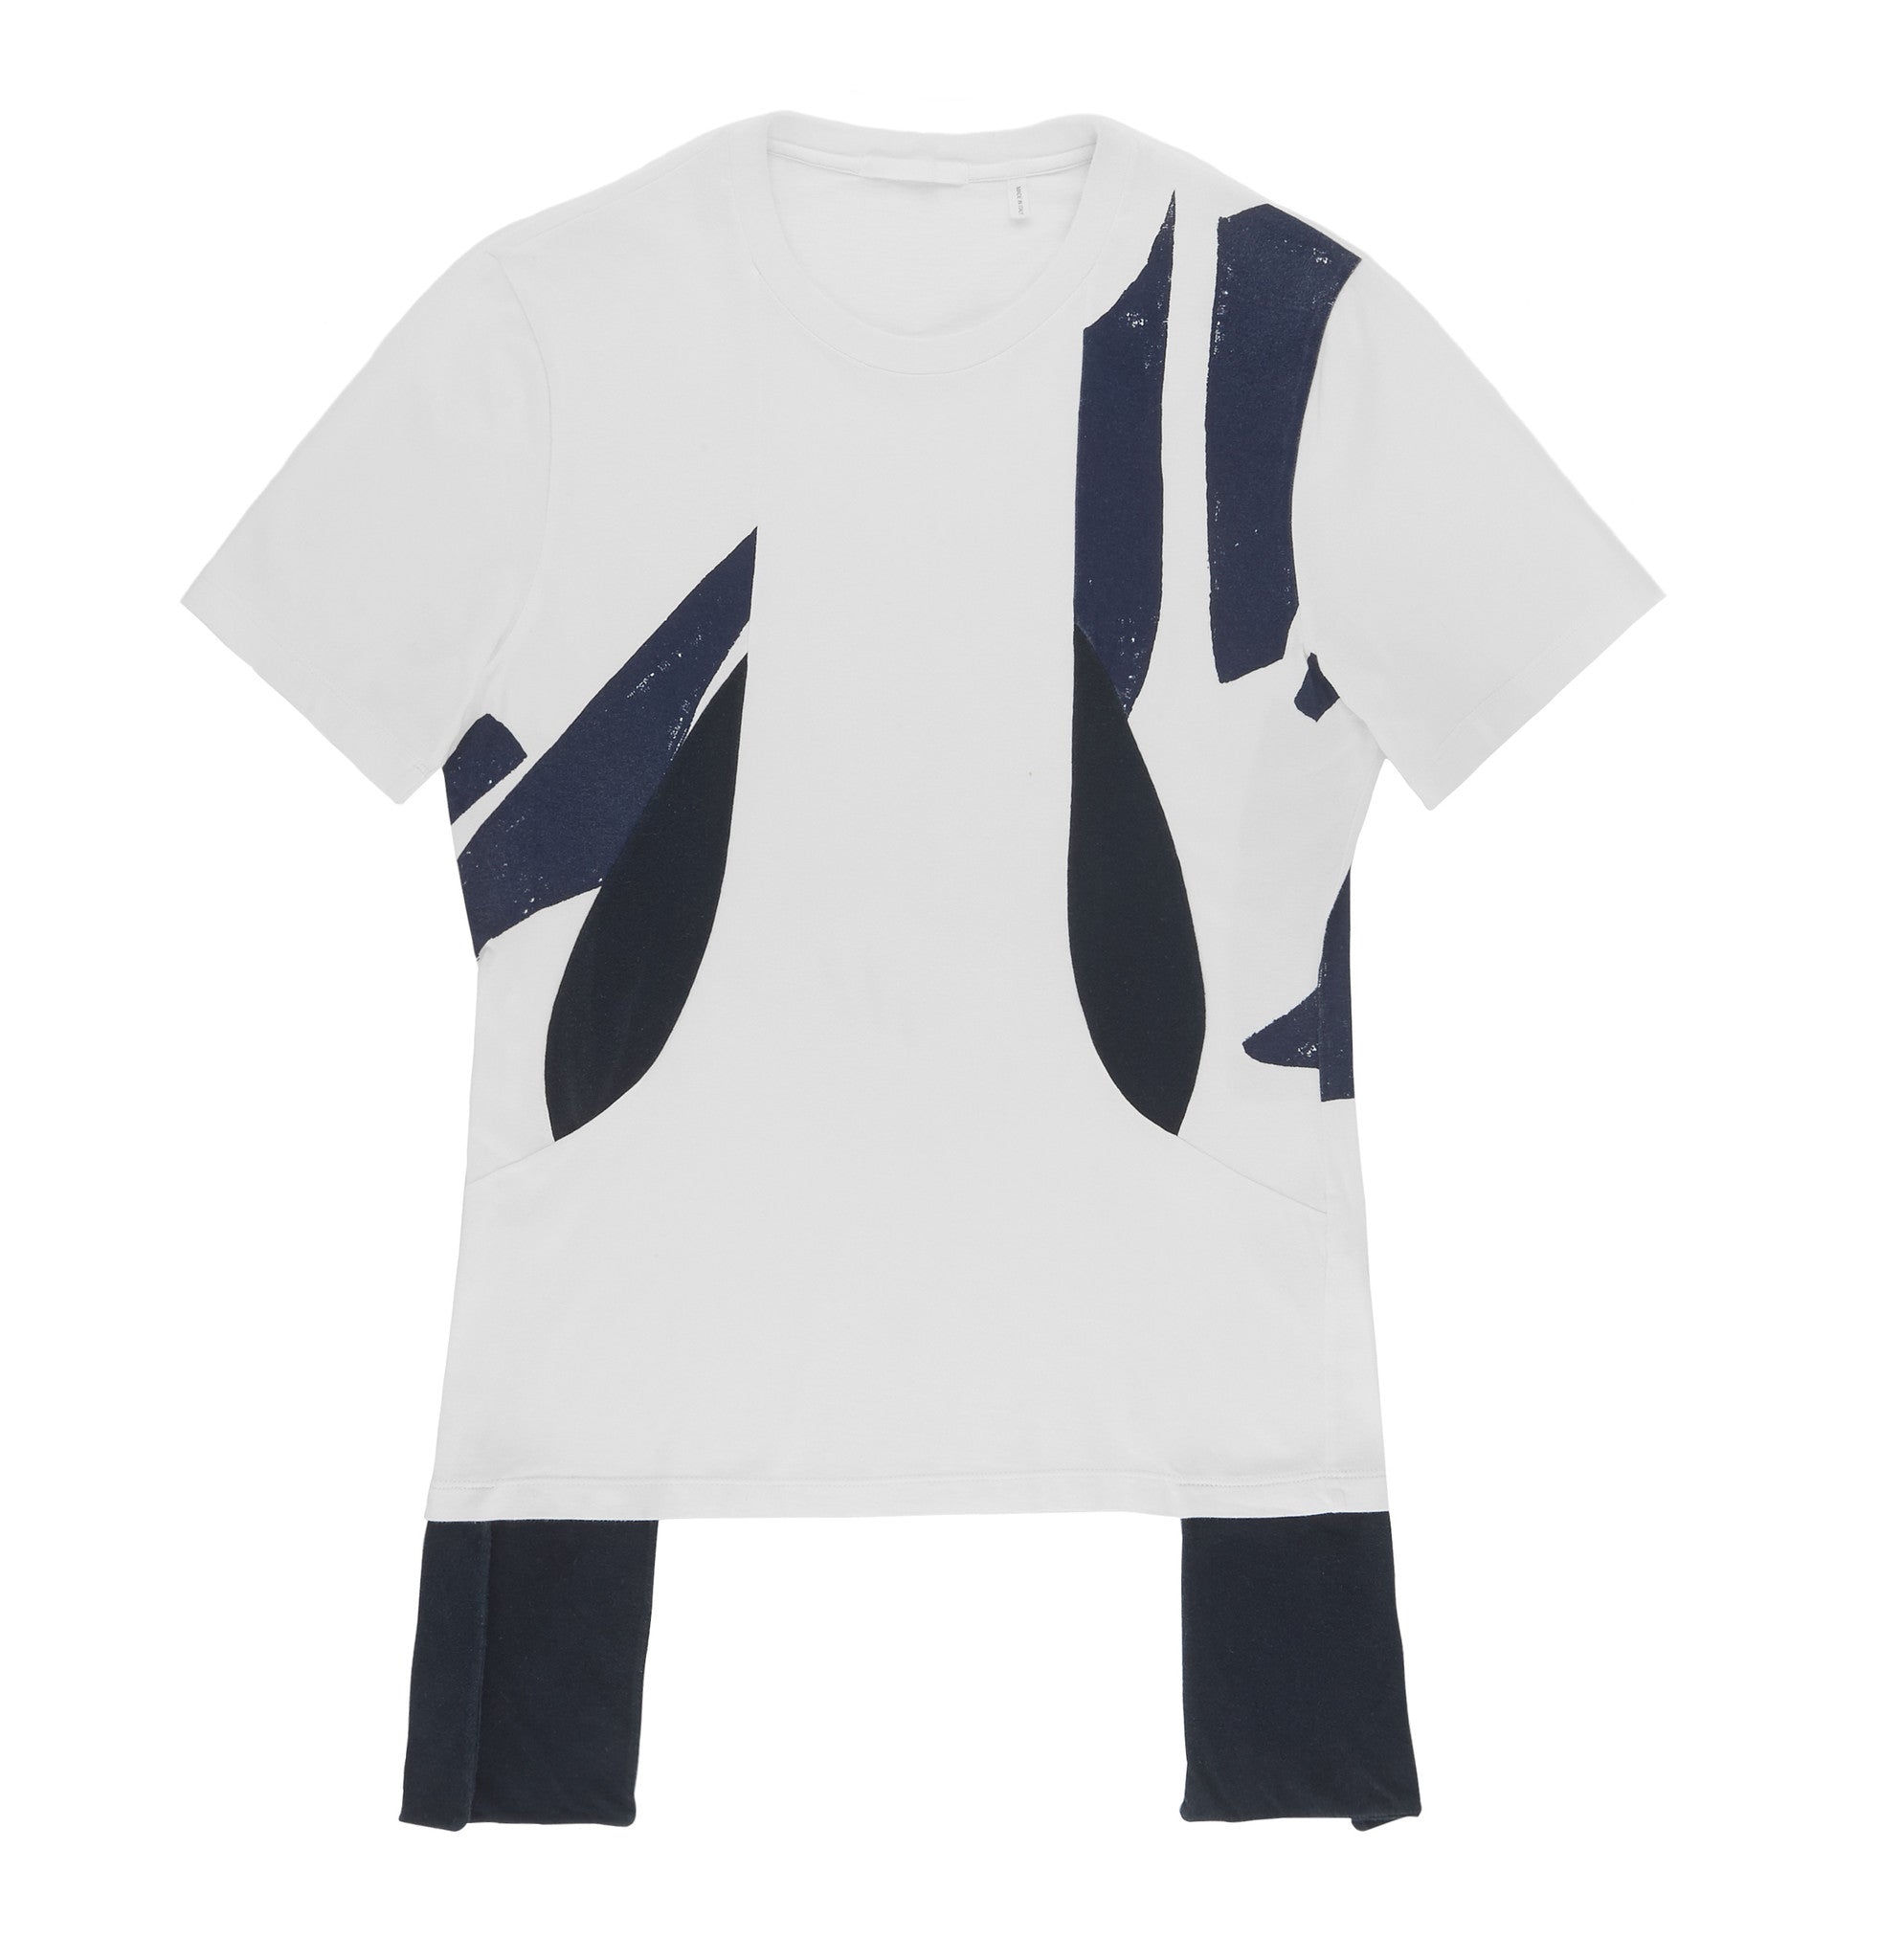 Helmut Lang 2003 Deconstructed Abstract T-Shirt with Leg Straps 